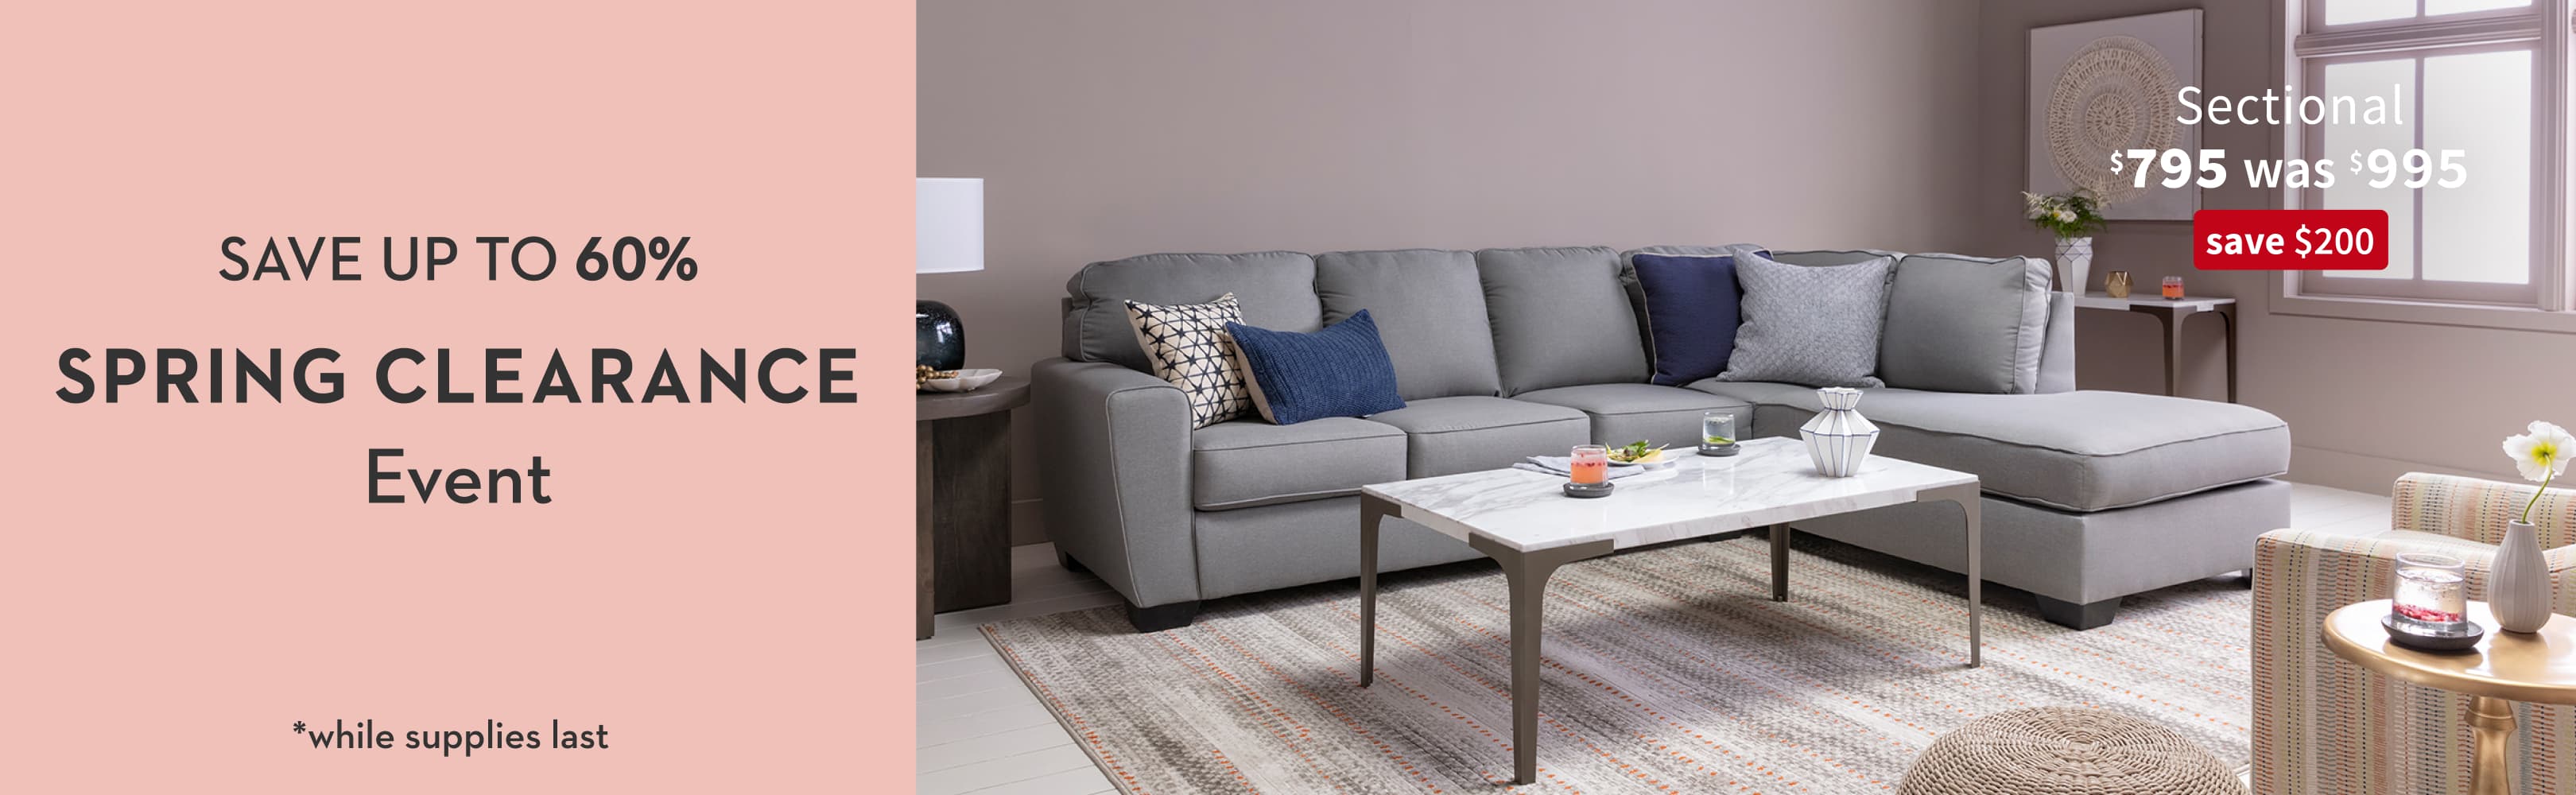 Save up to 60%. Spring Clearance Event *while supplies last. Sectional. $795 was $995. Save $200.